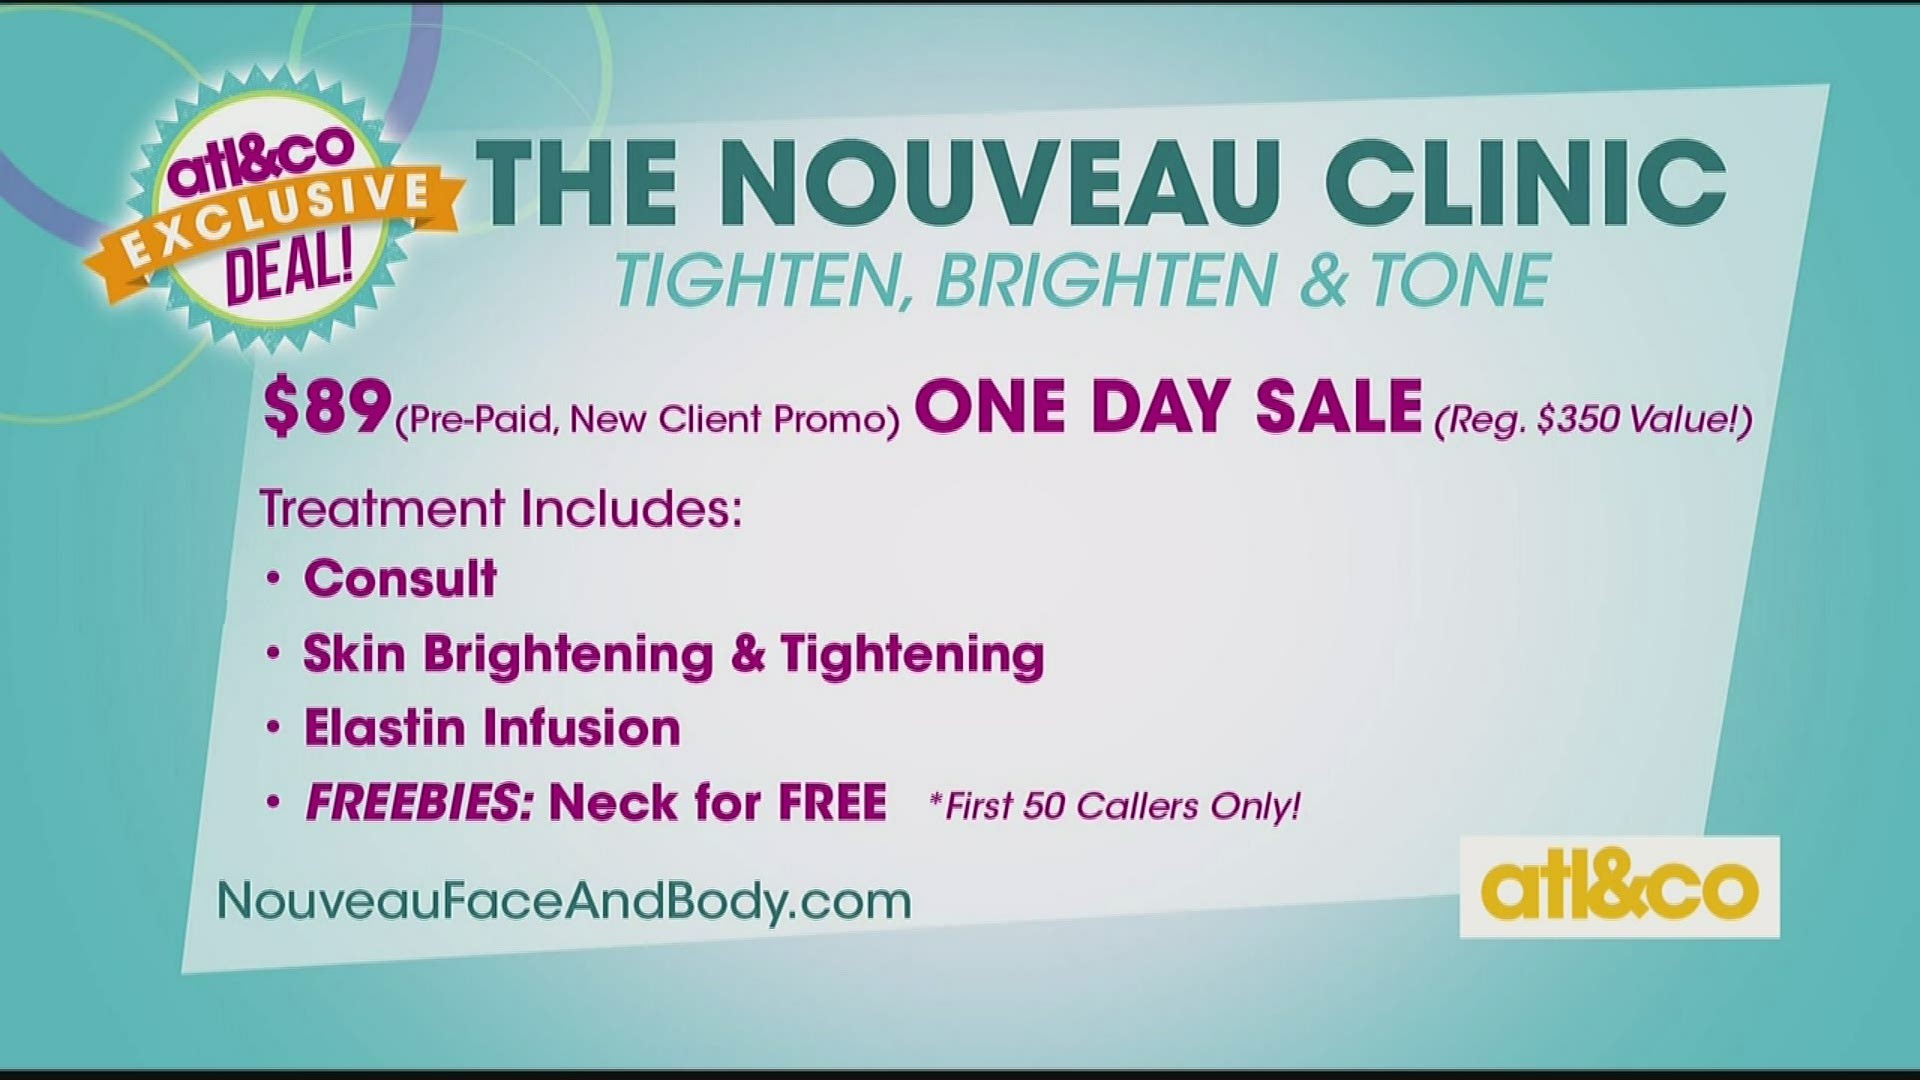 Get a special offer from the Nouveau Clinic on A&C.